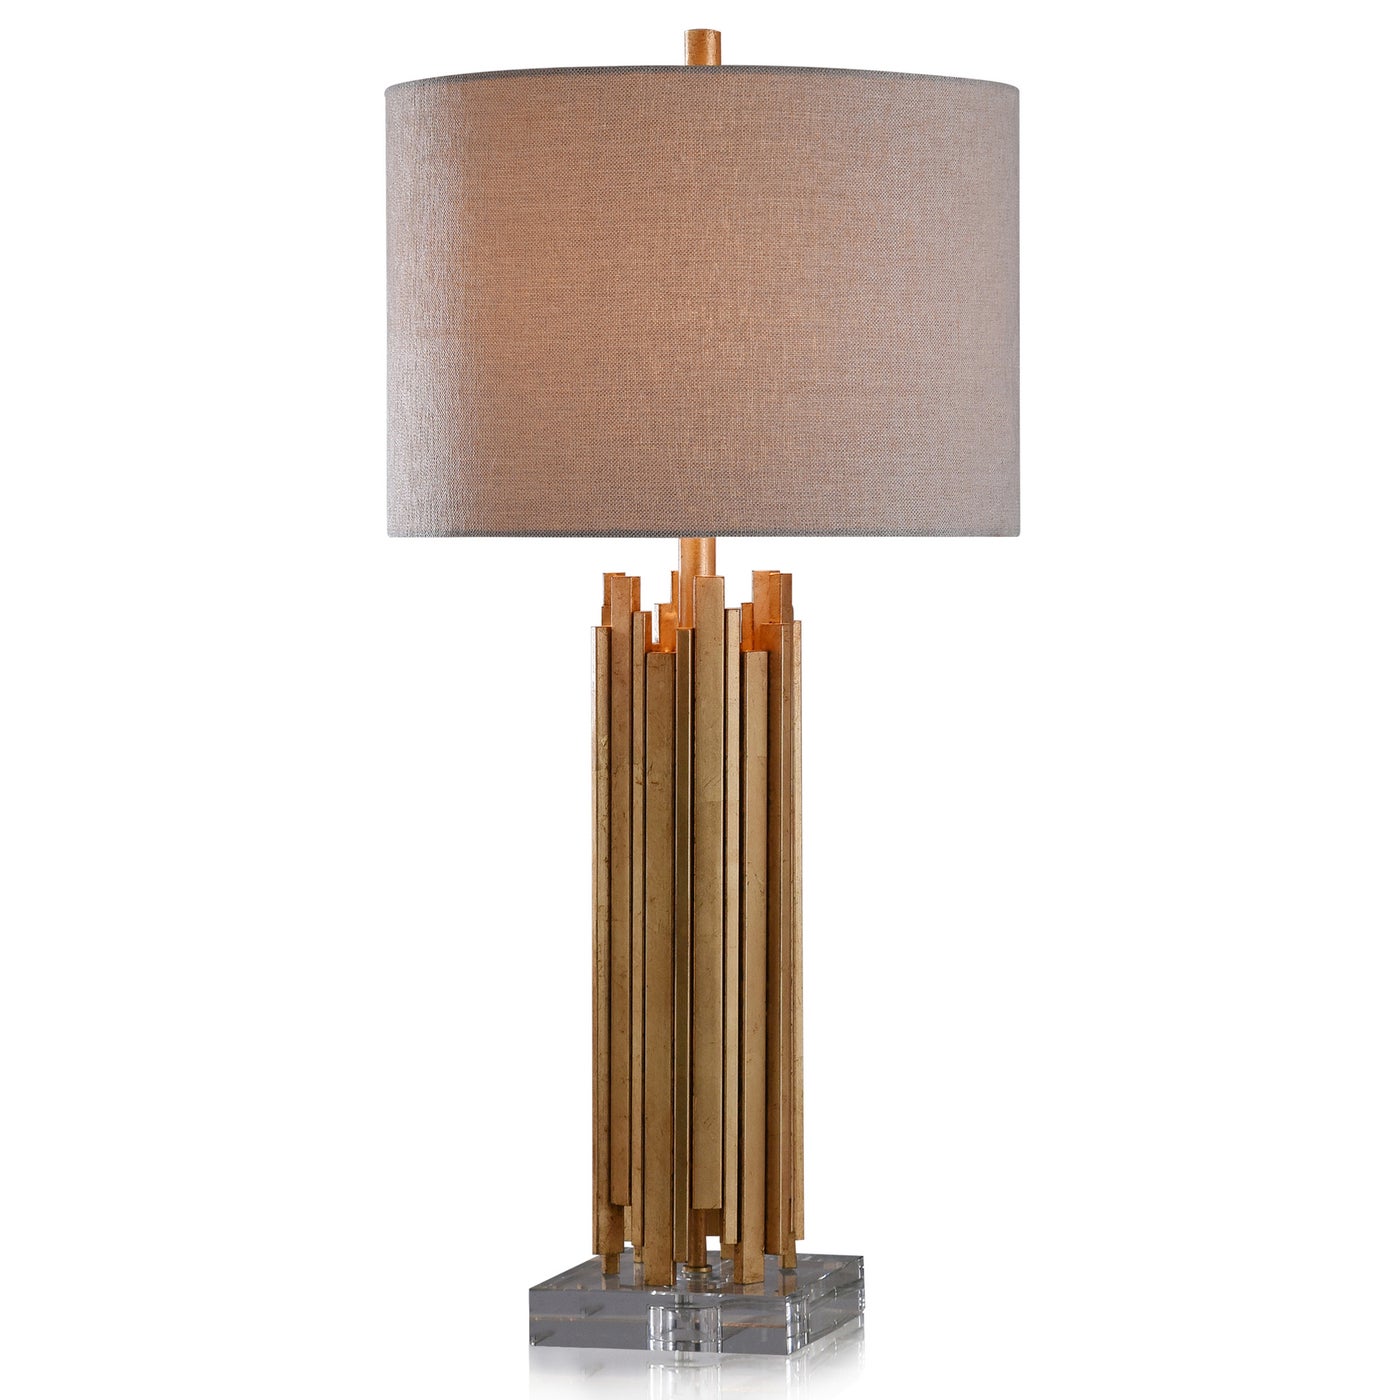 Slim Antique Brass Table Lamp With Metal Shade